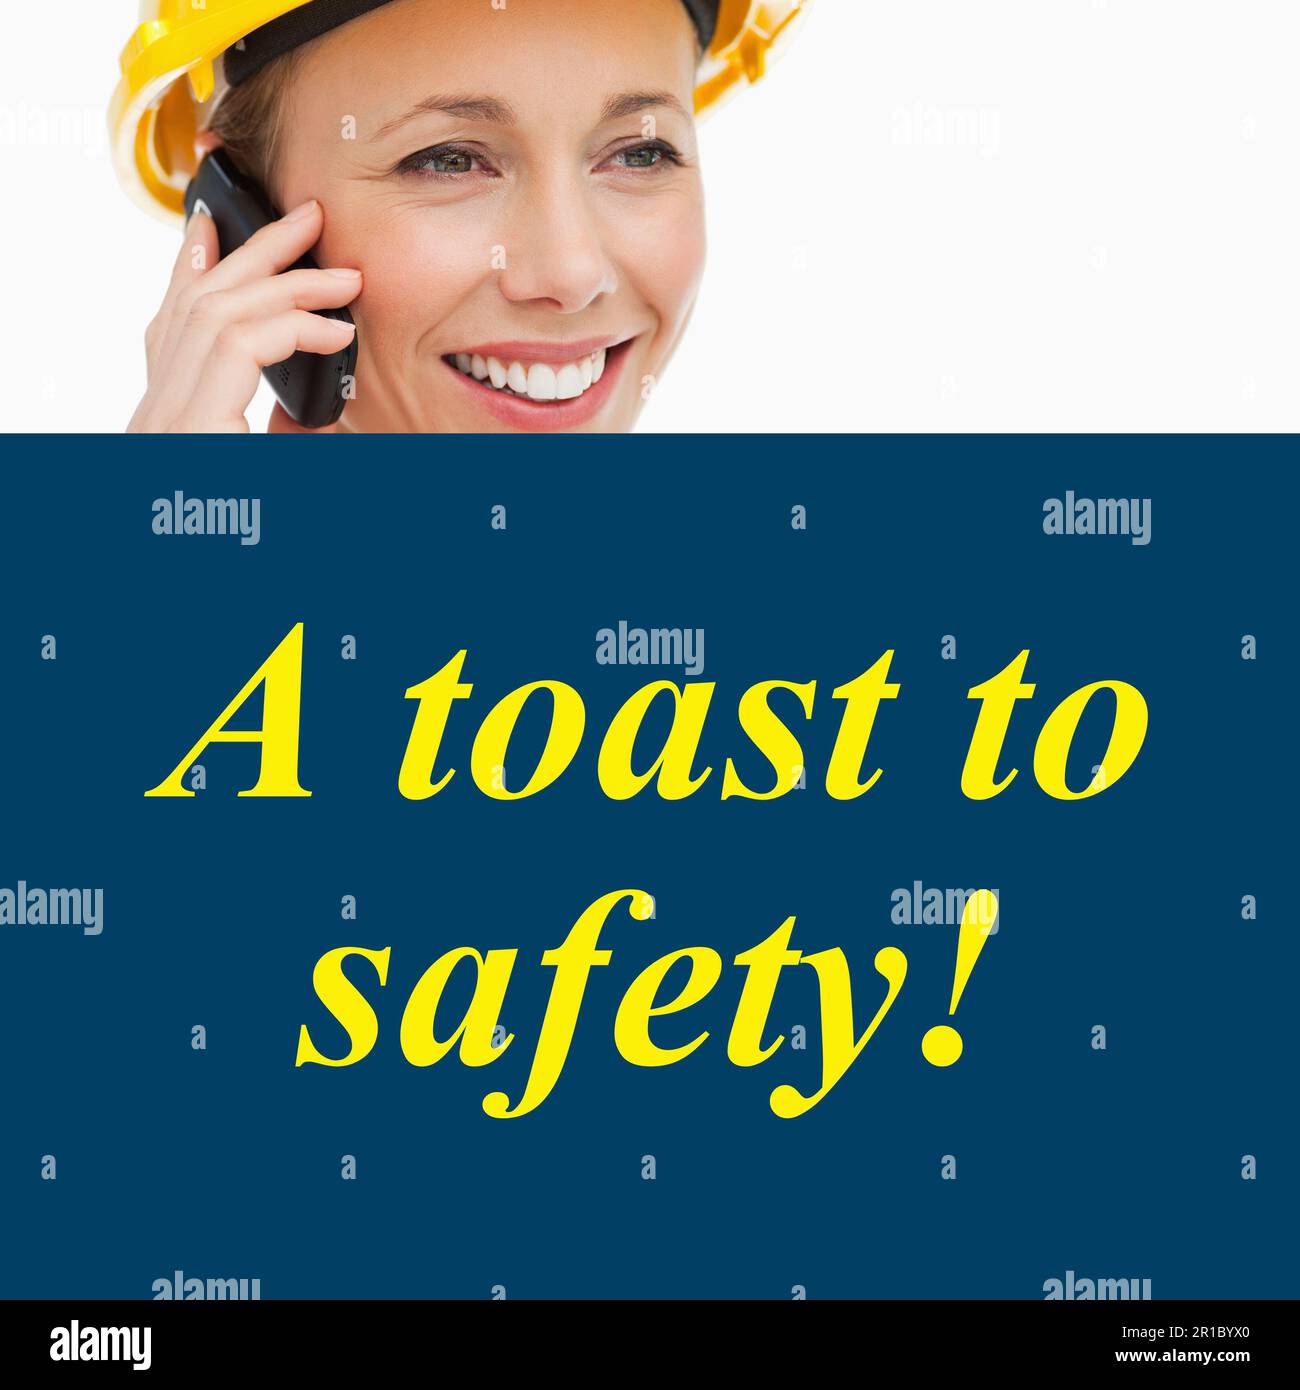 Composition of health and safety text over caucasian woman holding safety helmet Stock Photo